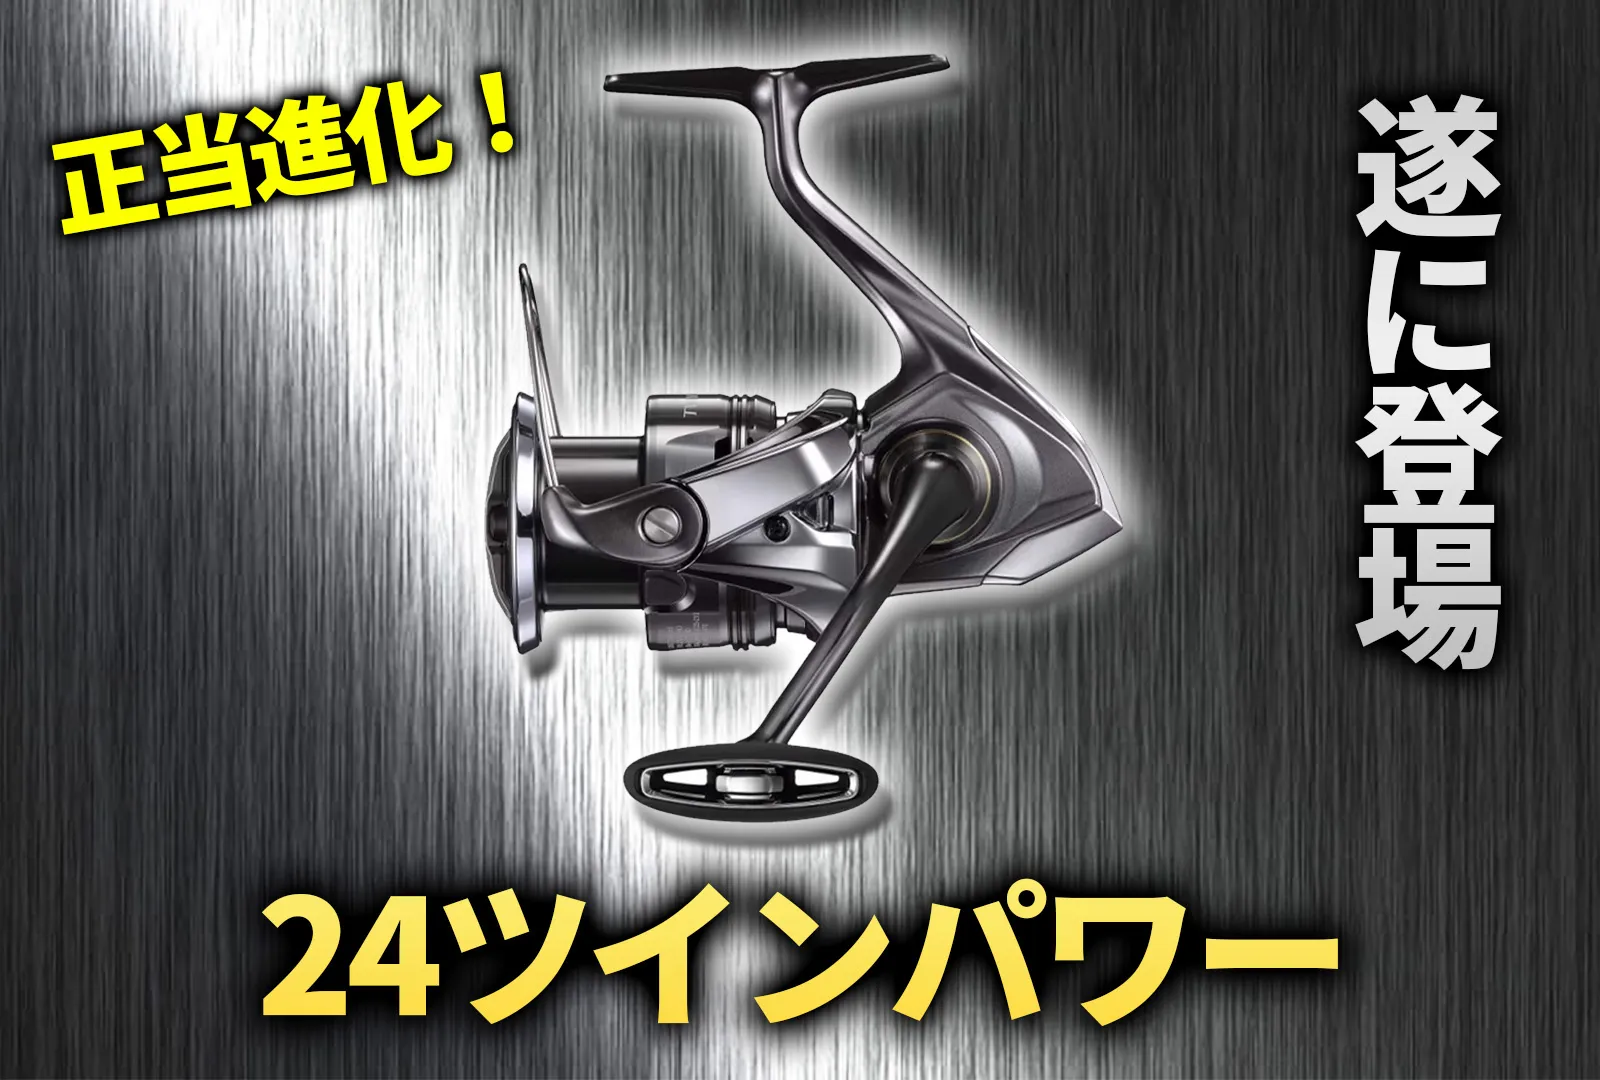 Shimano 24 Twin Power Review: The Features and Performance Explained in the Most Straightforward Way!